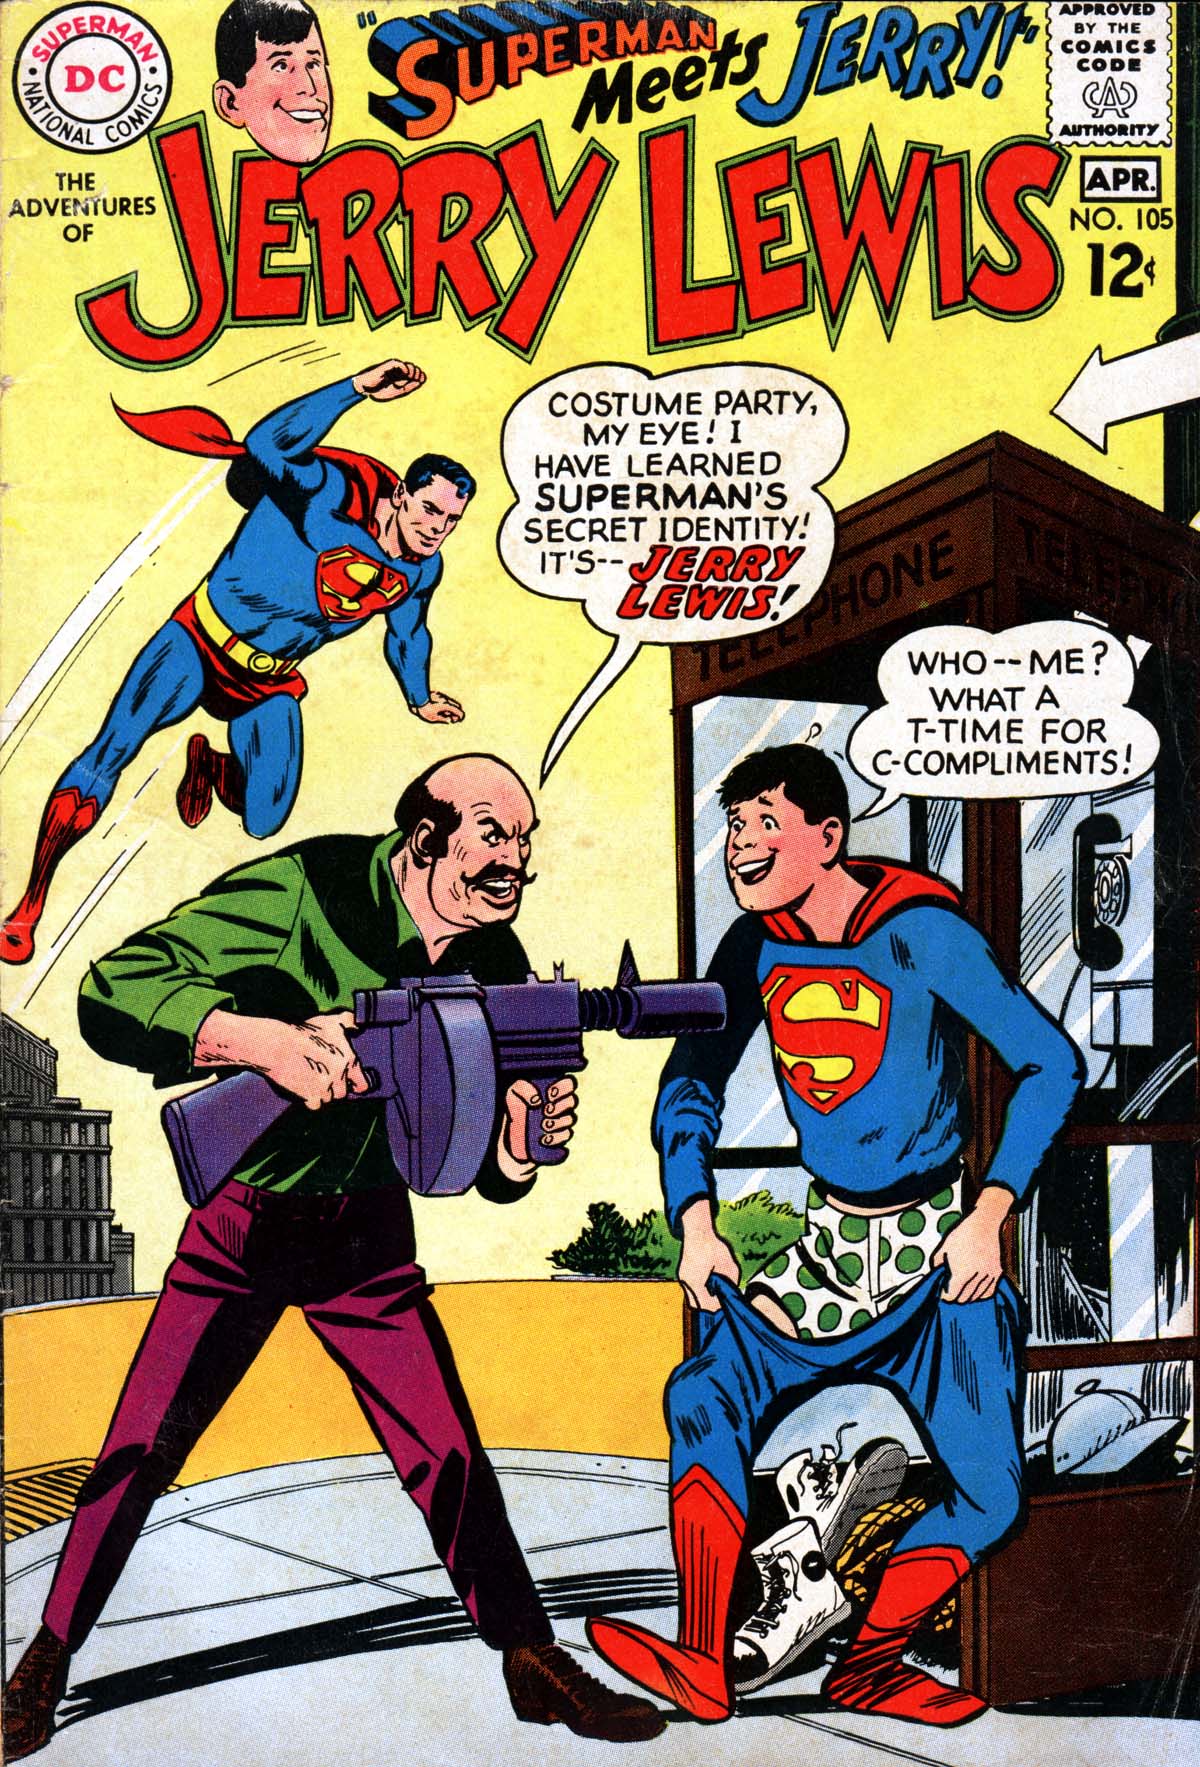 Read online The Adventures of Jerry Lewis comic -  Issue #105 - 1